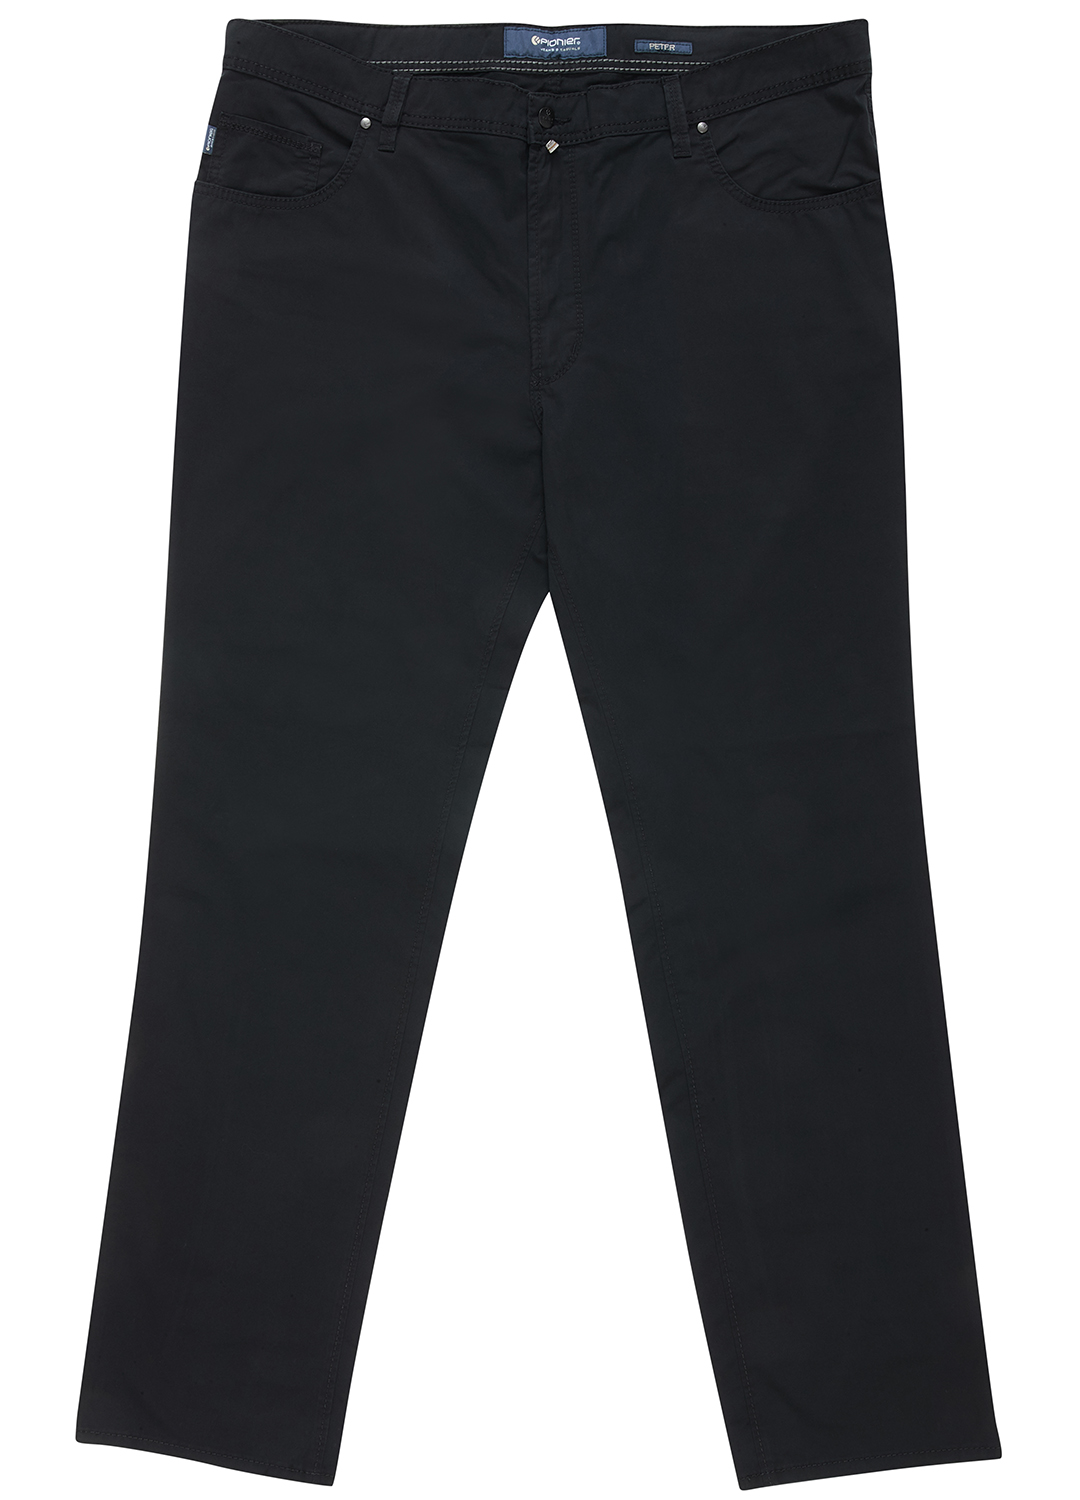 Black Jean Style Chino - High and Mighty Menswear